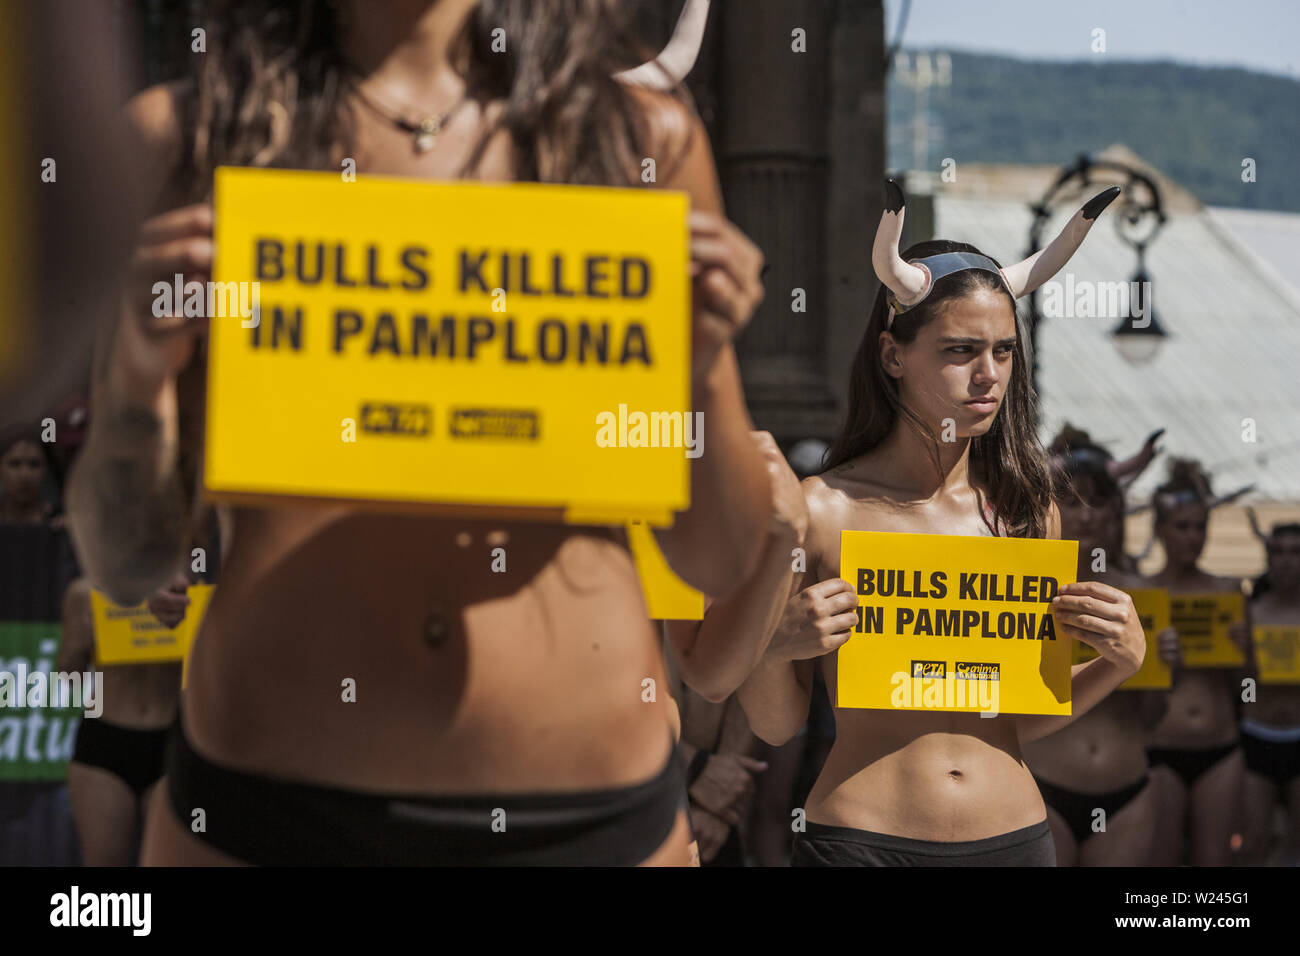 Pamplona, Navarra, Spain. 5th July, 2019. Activists against animal cruelty hold banners anti bullfightings killings in a protesting performance before the San Fermin celebrations in the main square of Pamplona, Spain. Credit: Celestino Arce Lavin/ZUMA Wire/Alamy Live News Stock Photo